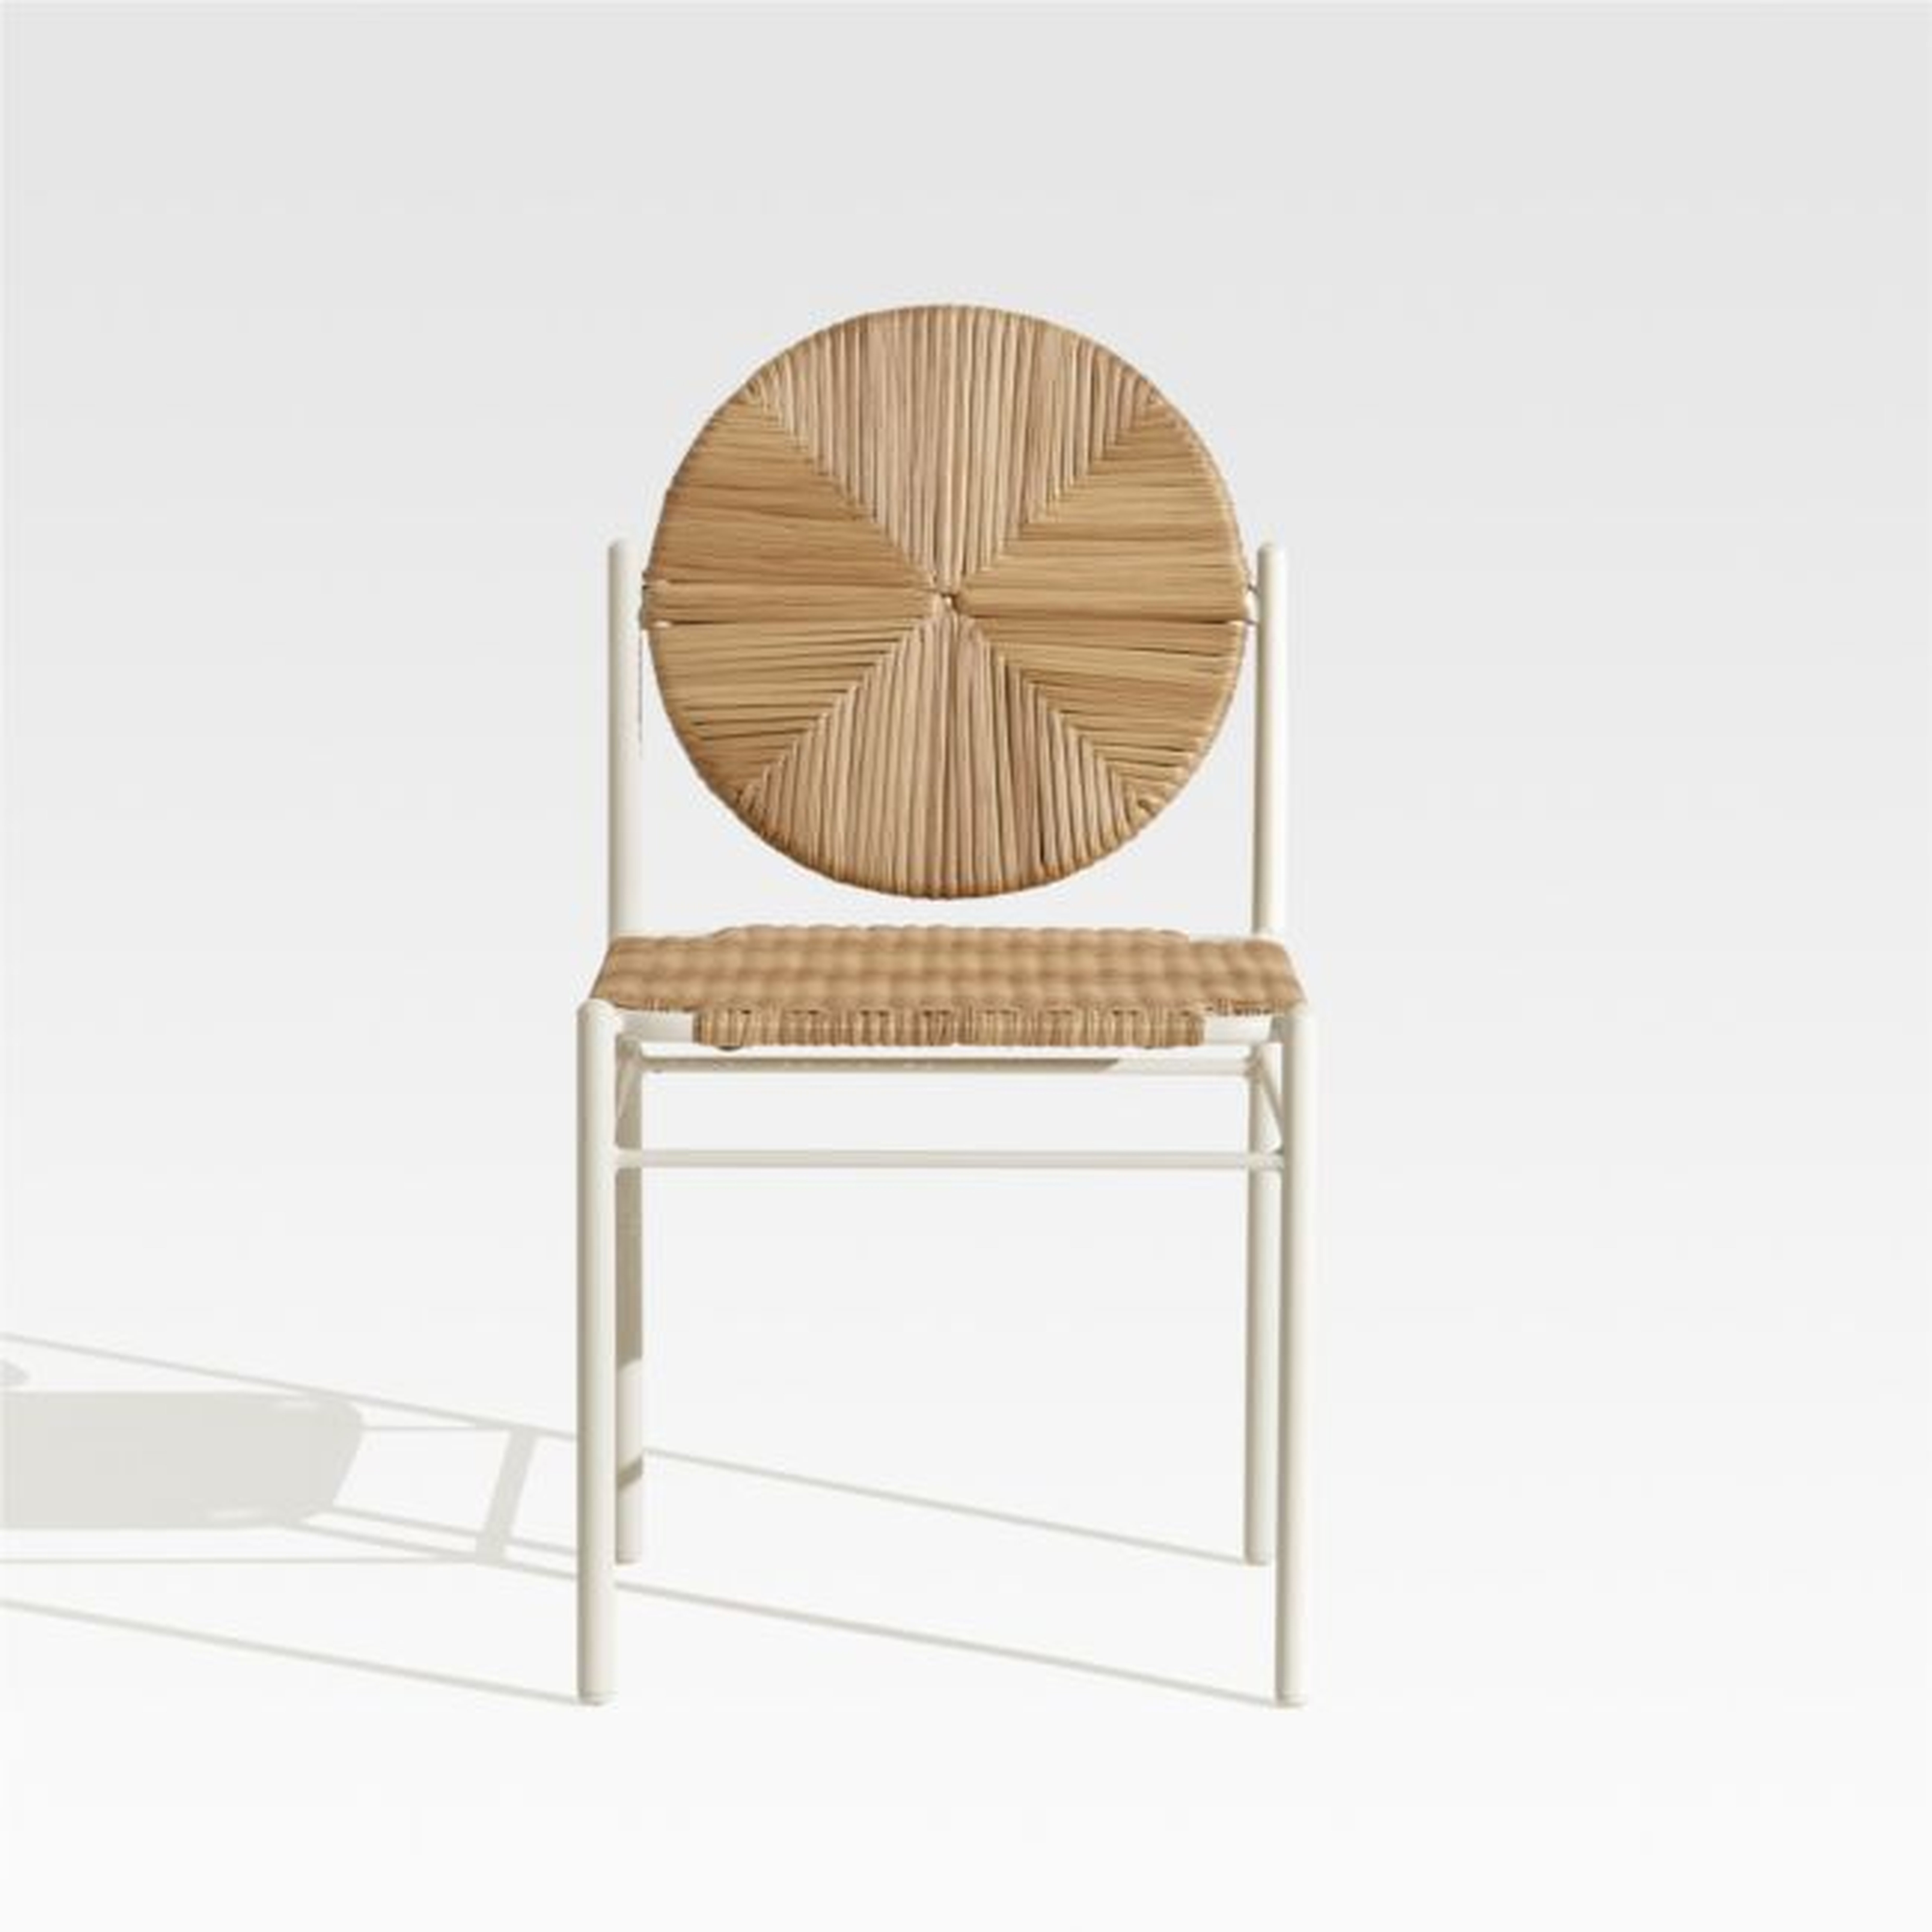 Corsica Outdoor Dining Chair - Crate and Barrel